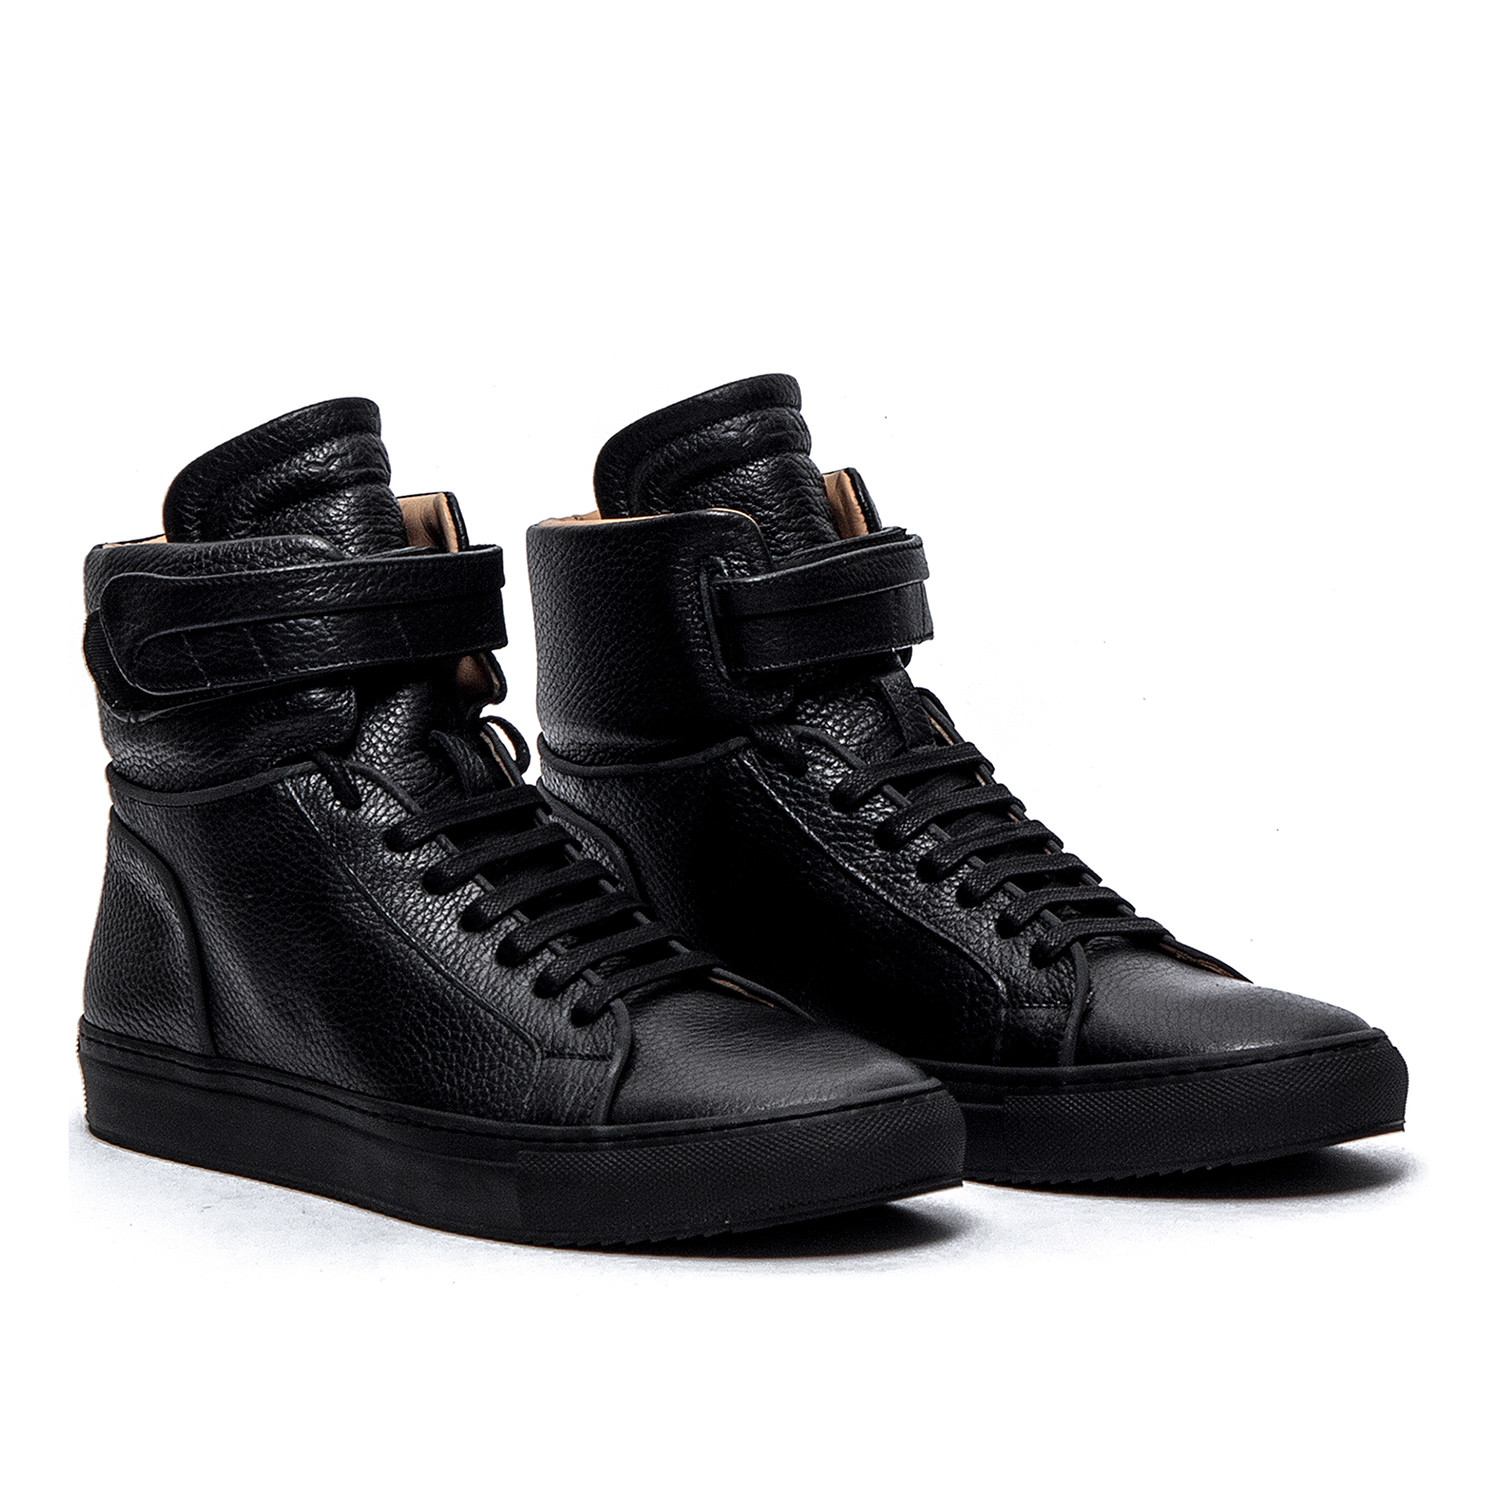 high top black leather sneakers